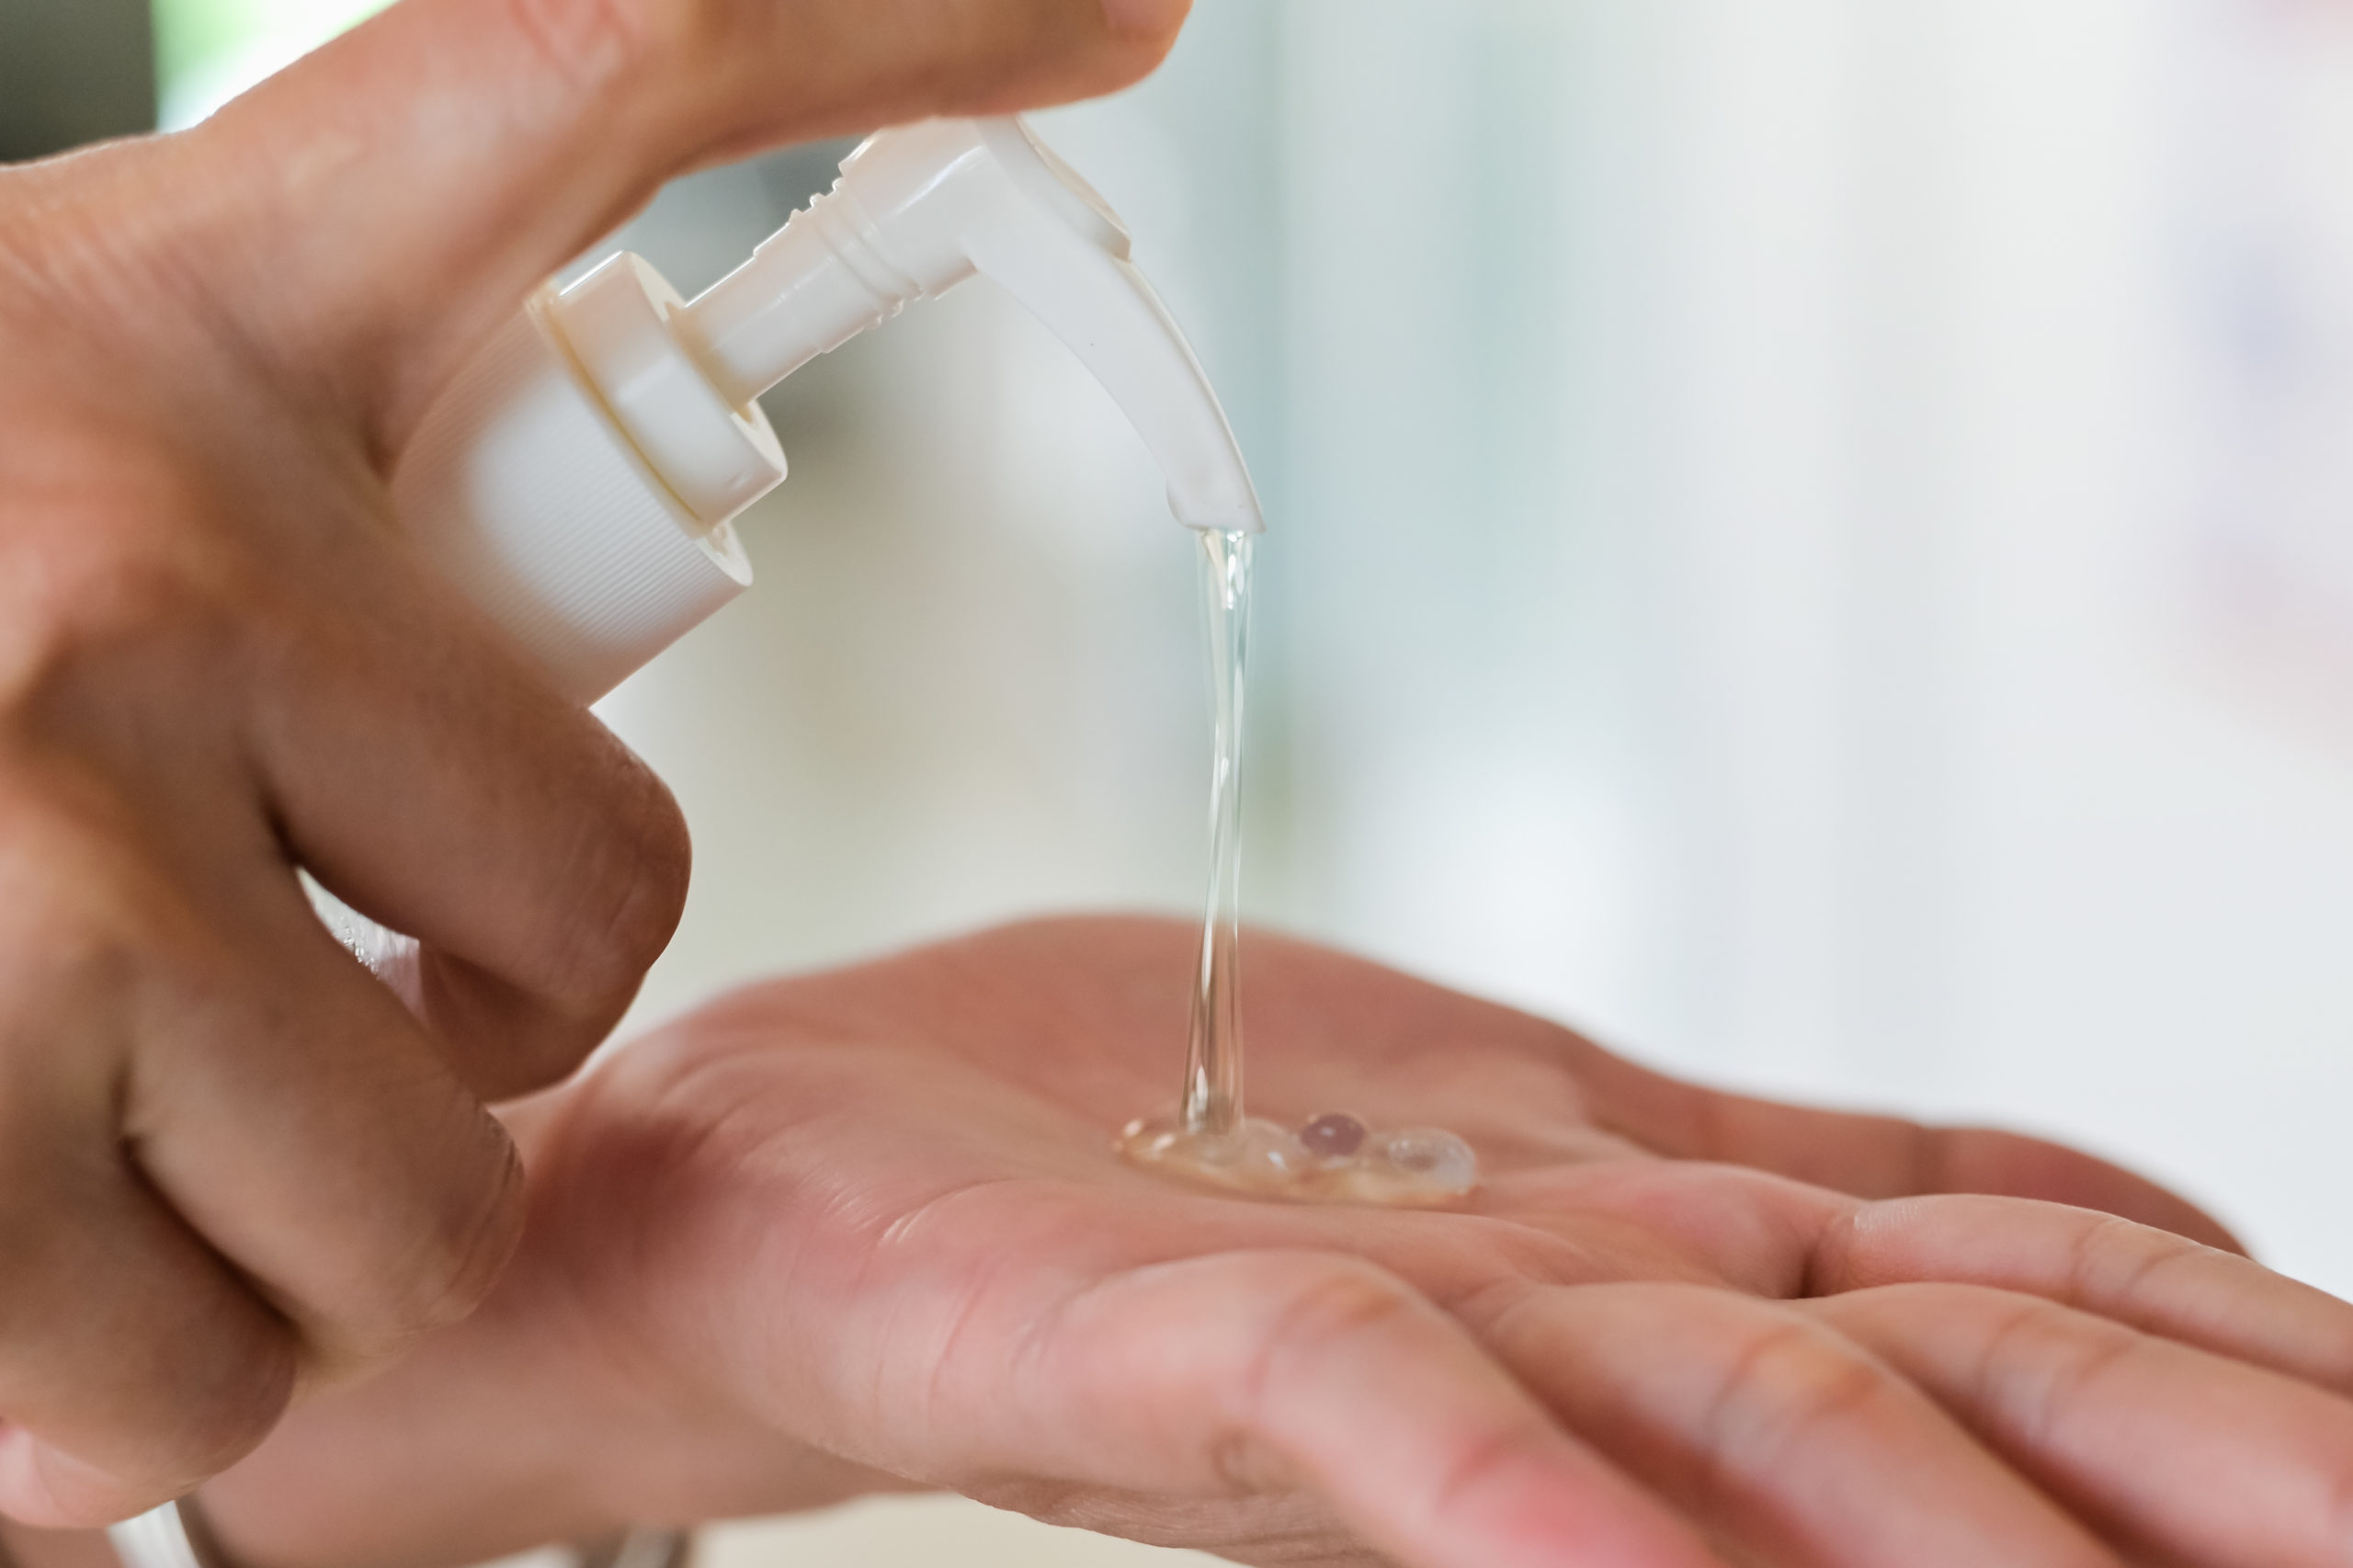 Alcohol Relapse Warning For Hand Sanitizer Users